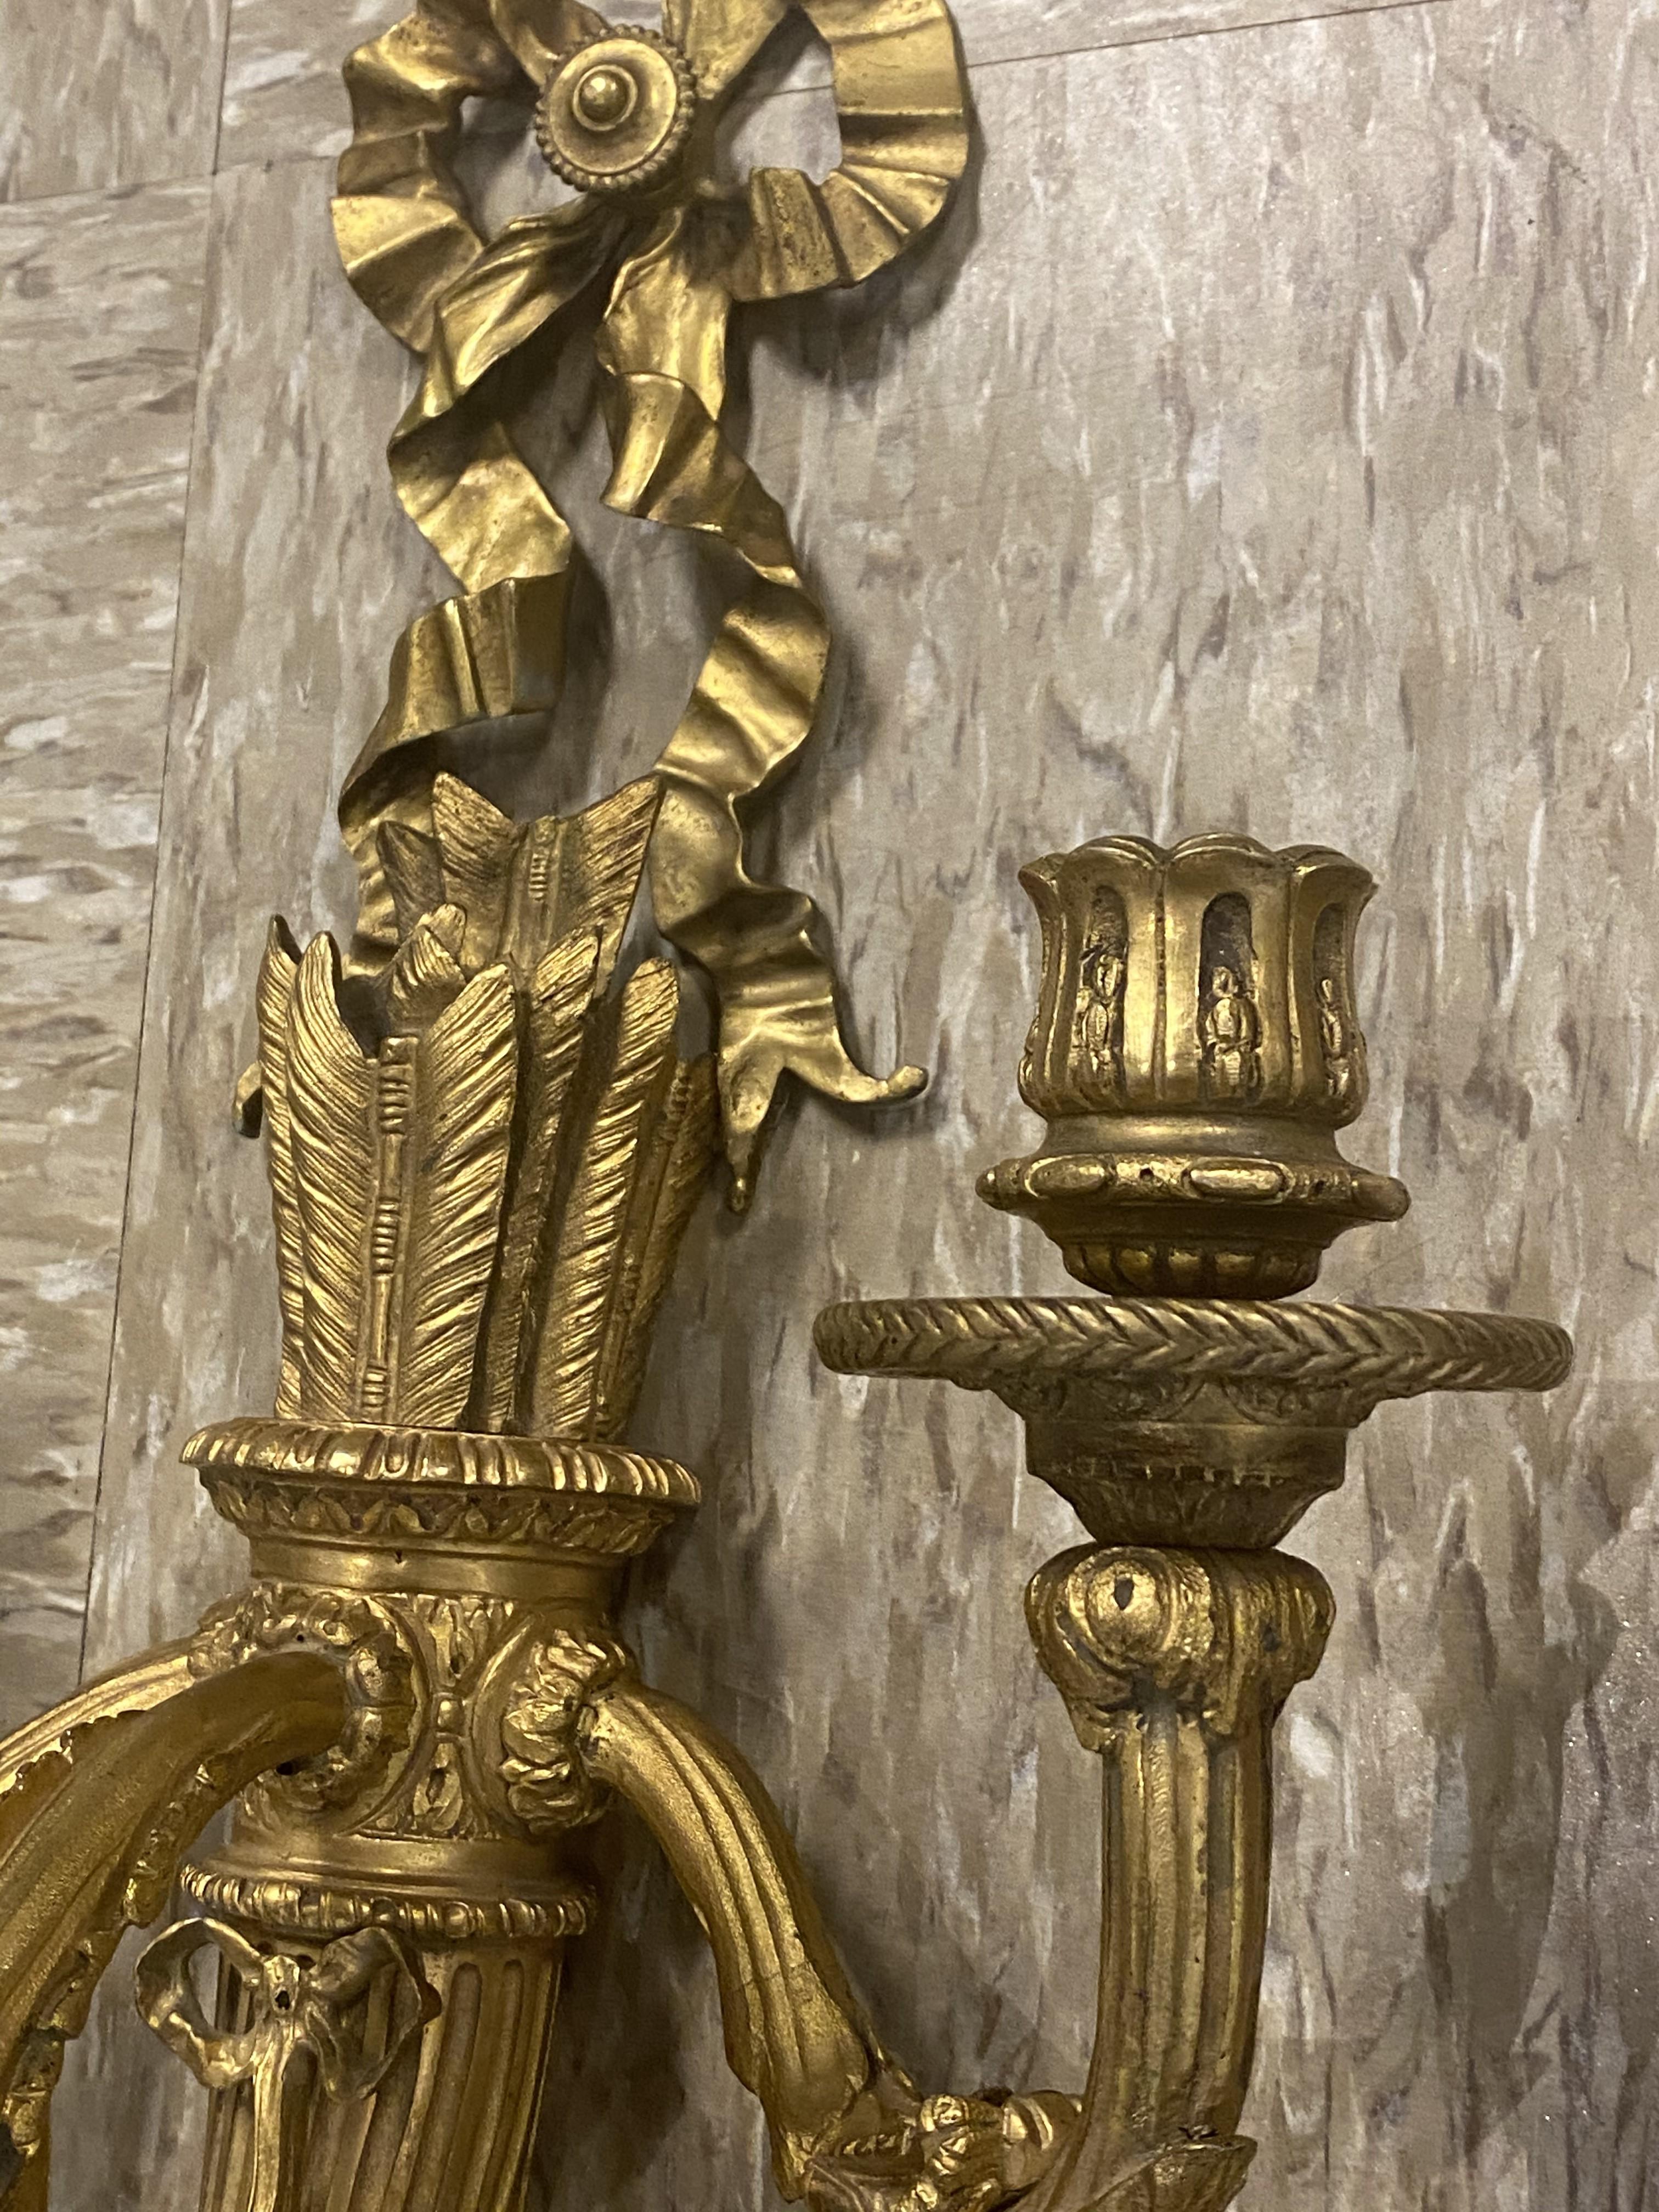 A pair of circa 19200 French gilt bronze sconces with 3 lights, beautiful details.